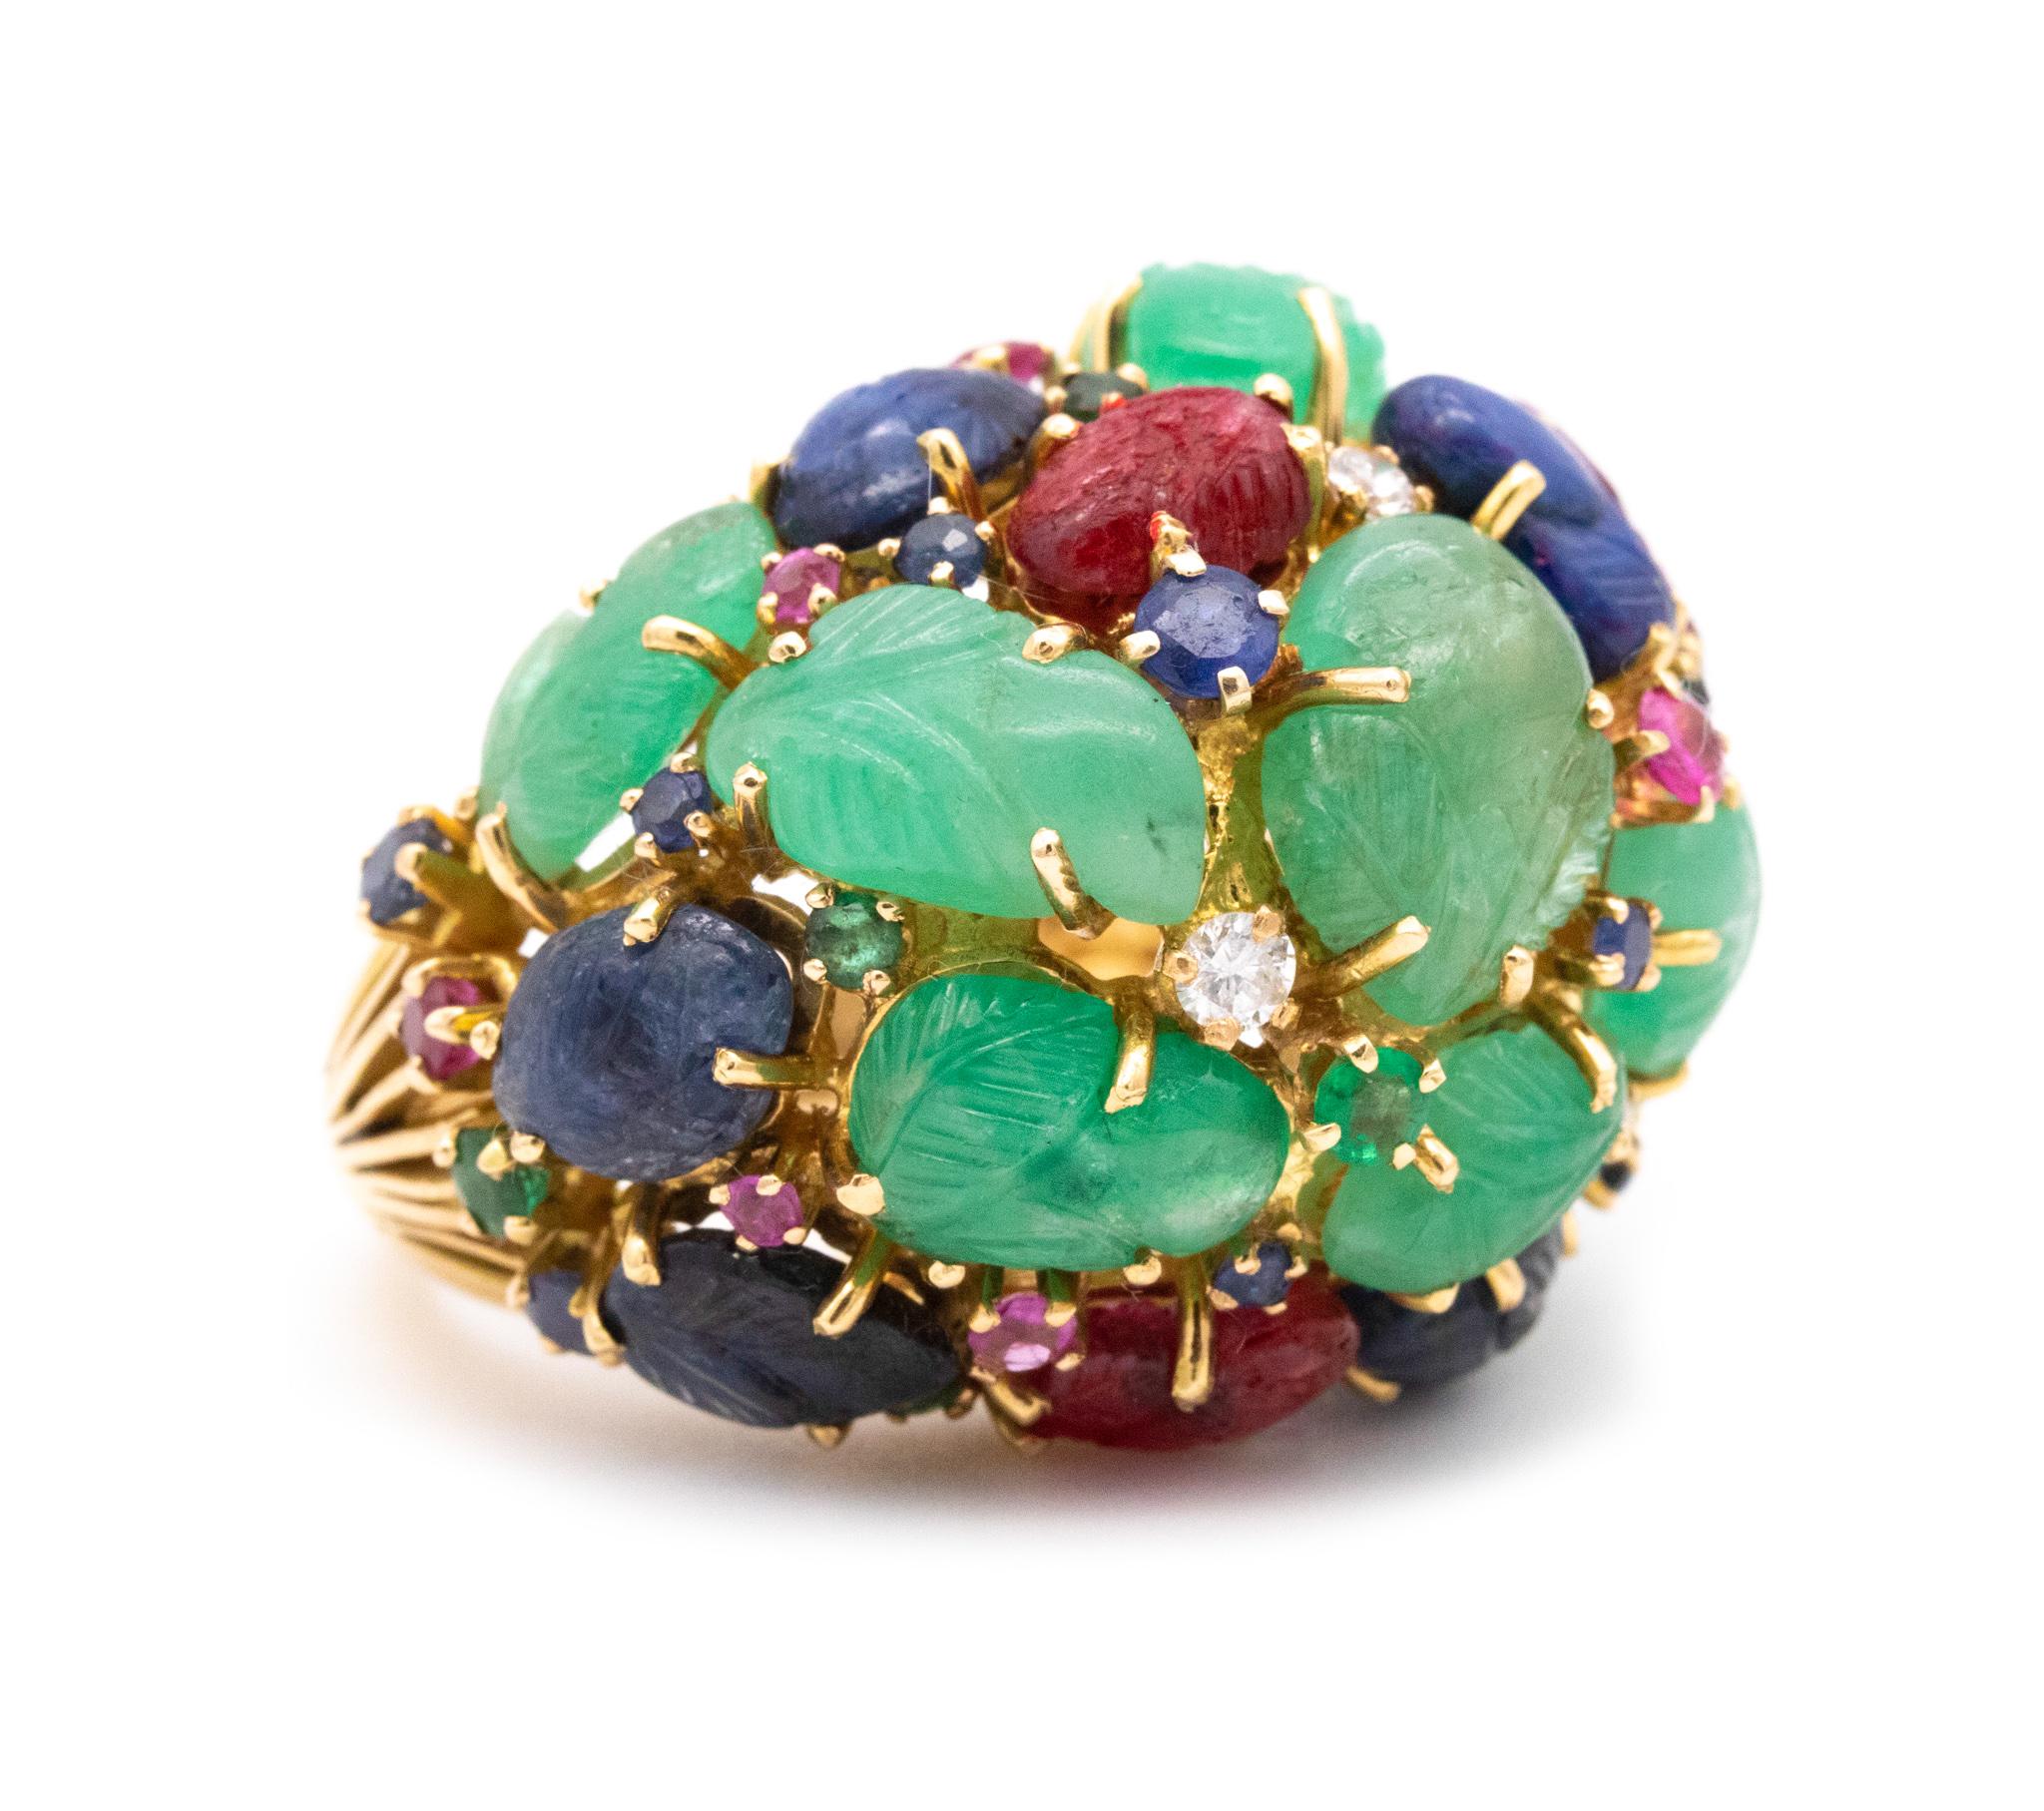 Colorful Tutti-Frutti jeweled domed cocktail ring.

Iconic colorful piece of jewelry from the late American art deco / mid century periods, circa 1950. The mounting elements was individually assembled and crafted in solid 18 karats of yellow